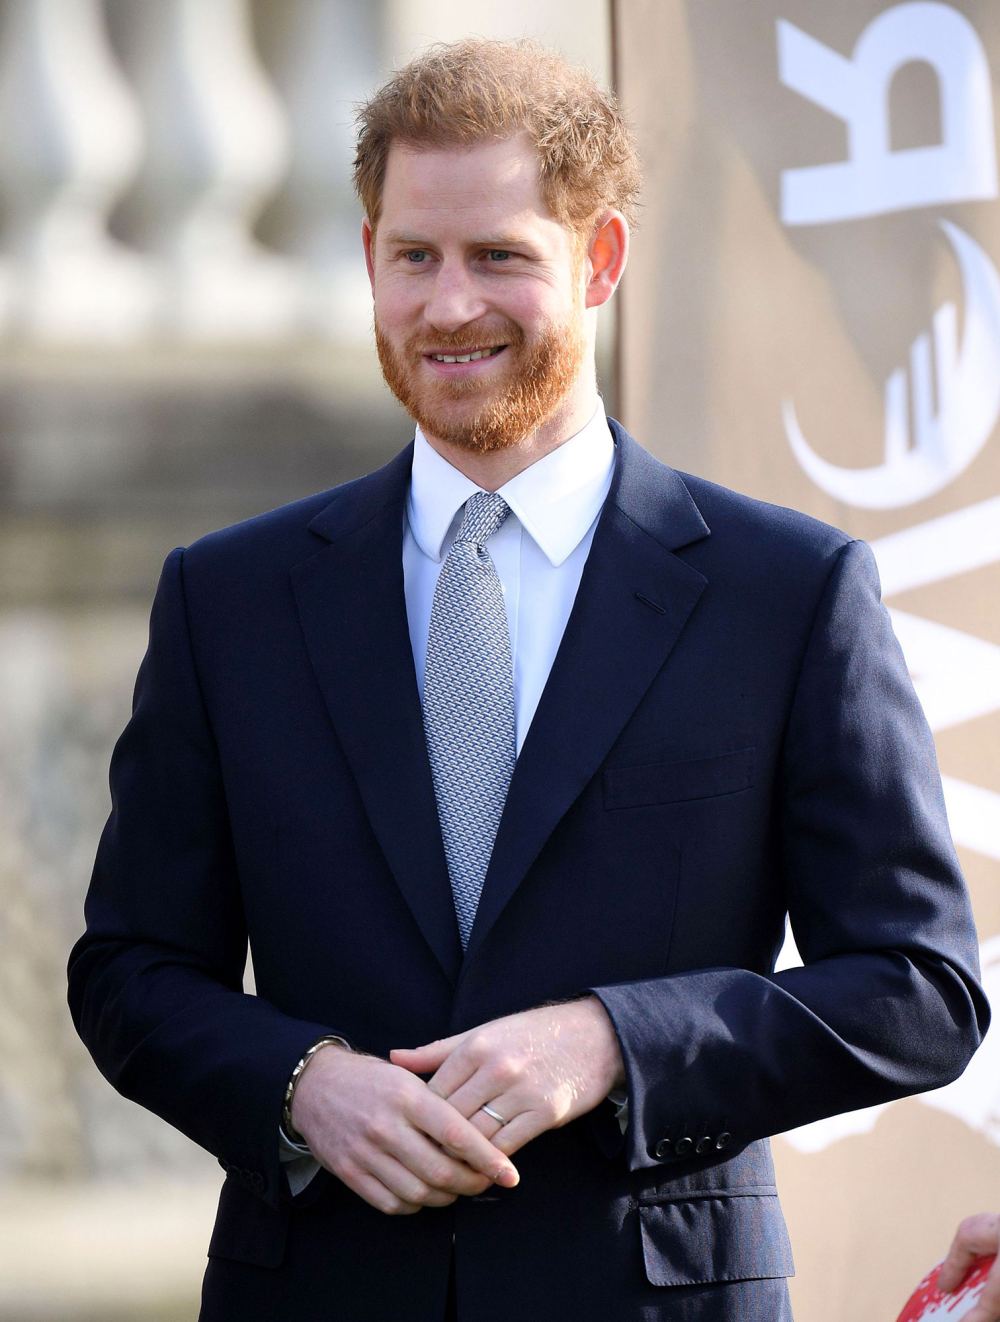 Prince Harry Once Sang Shaggy to Him When They First Met